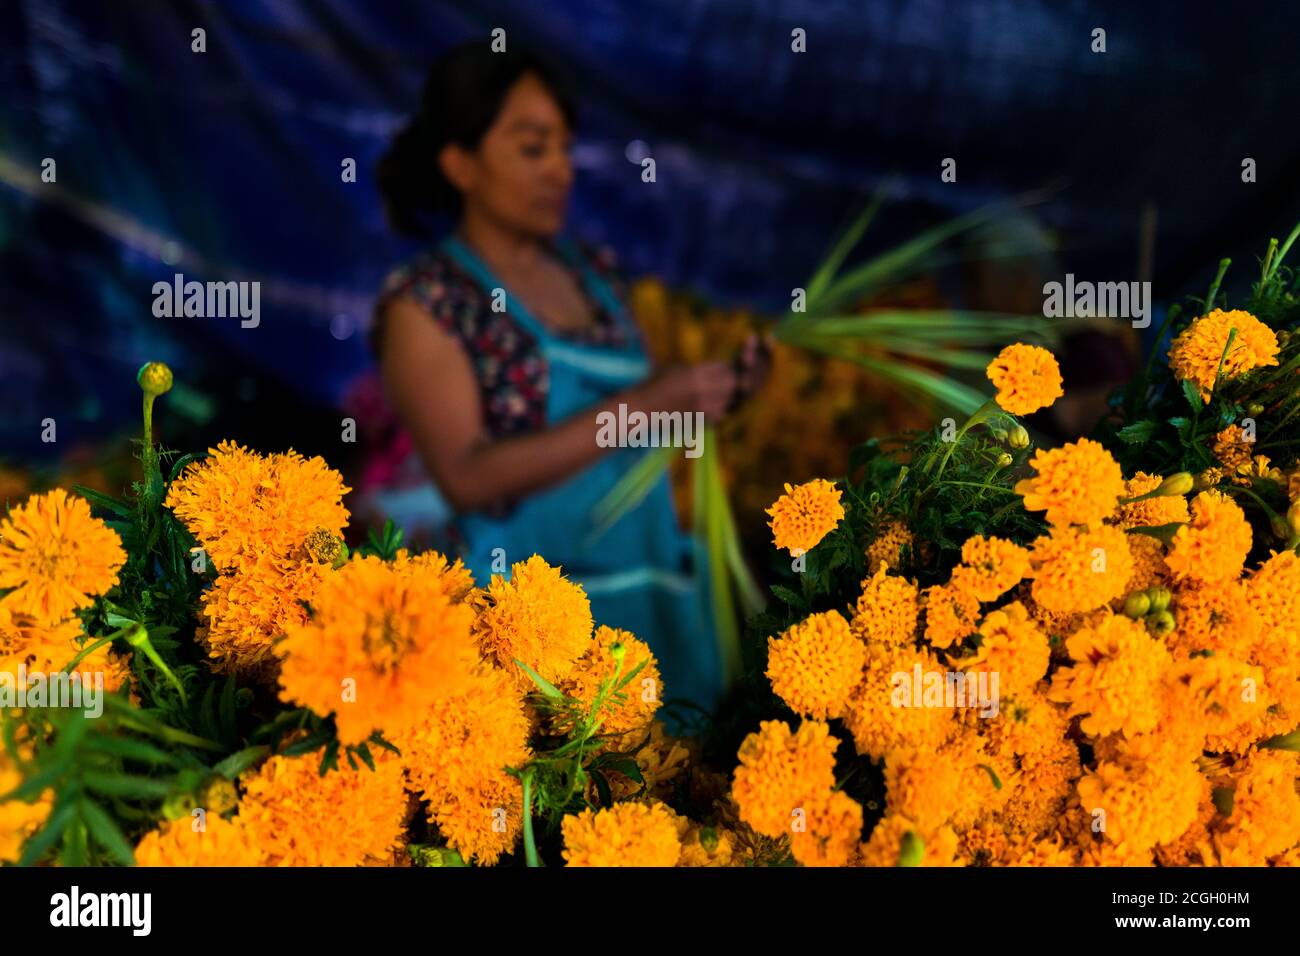 A Mexican flower market vendor sell piles of marigold flowers (Flor de muertos) for Day of the Dead festivities in Oaxaca, Mexico. Stock Photo